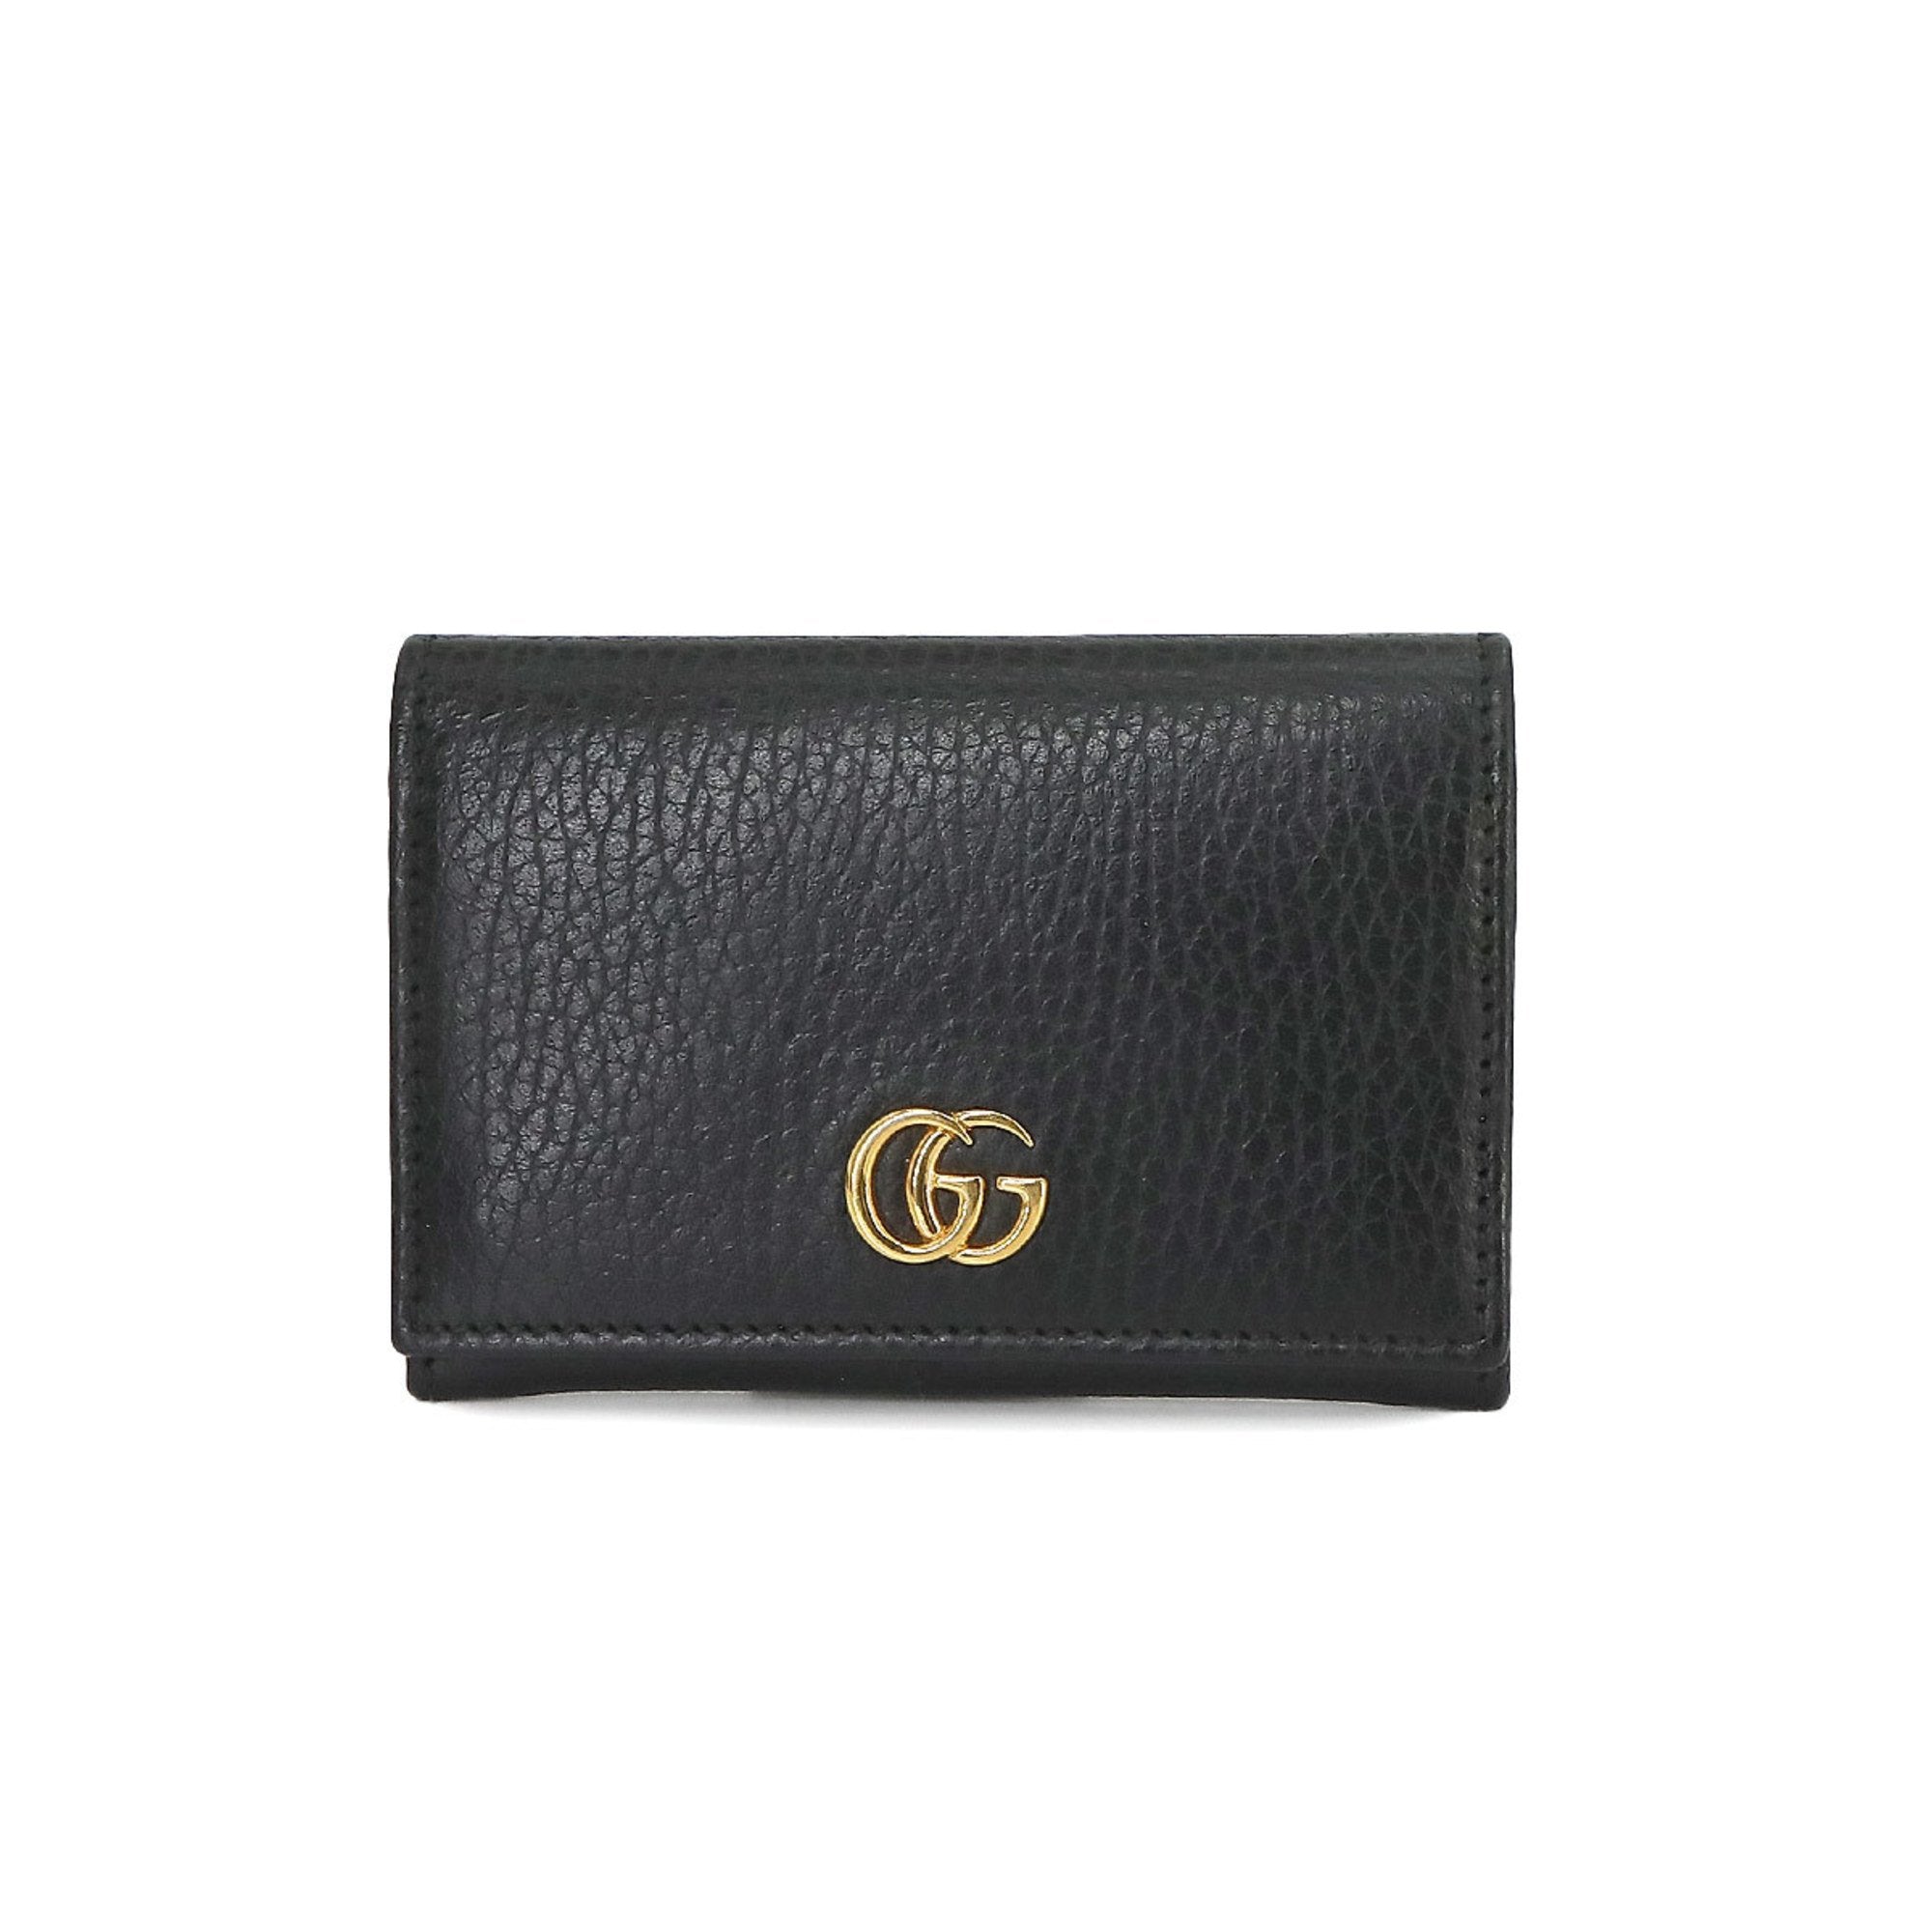 GG Marmont Card Case Wallet Leather Black 474748 Hardware